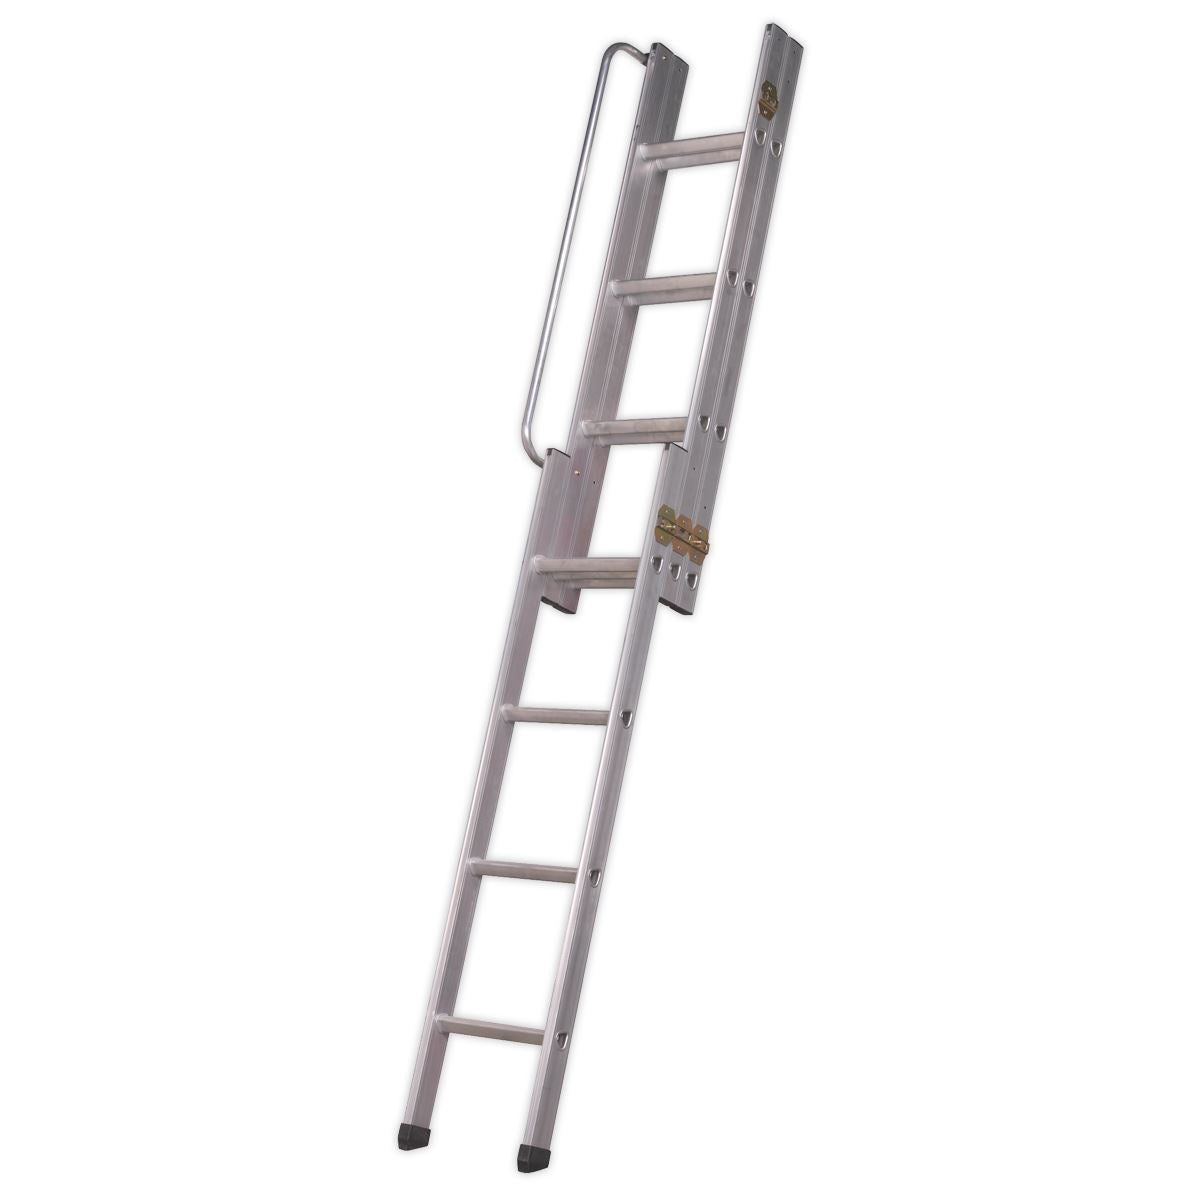 Sealey Loft Ladder 3-Section to BS 14975:2006